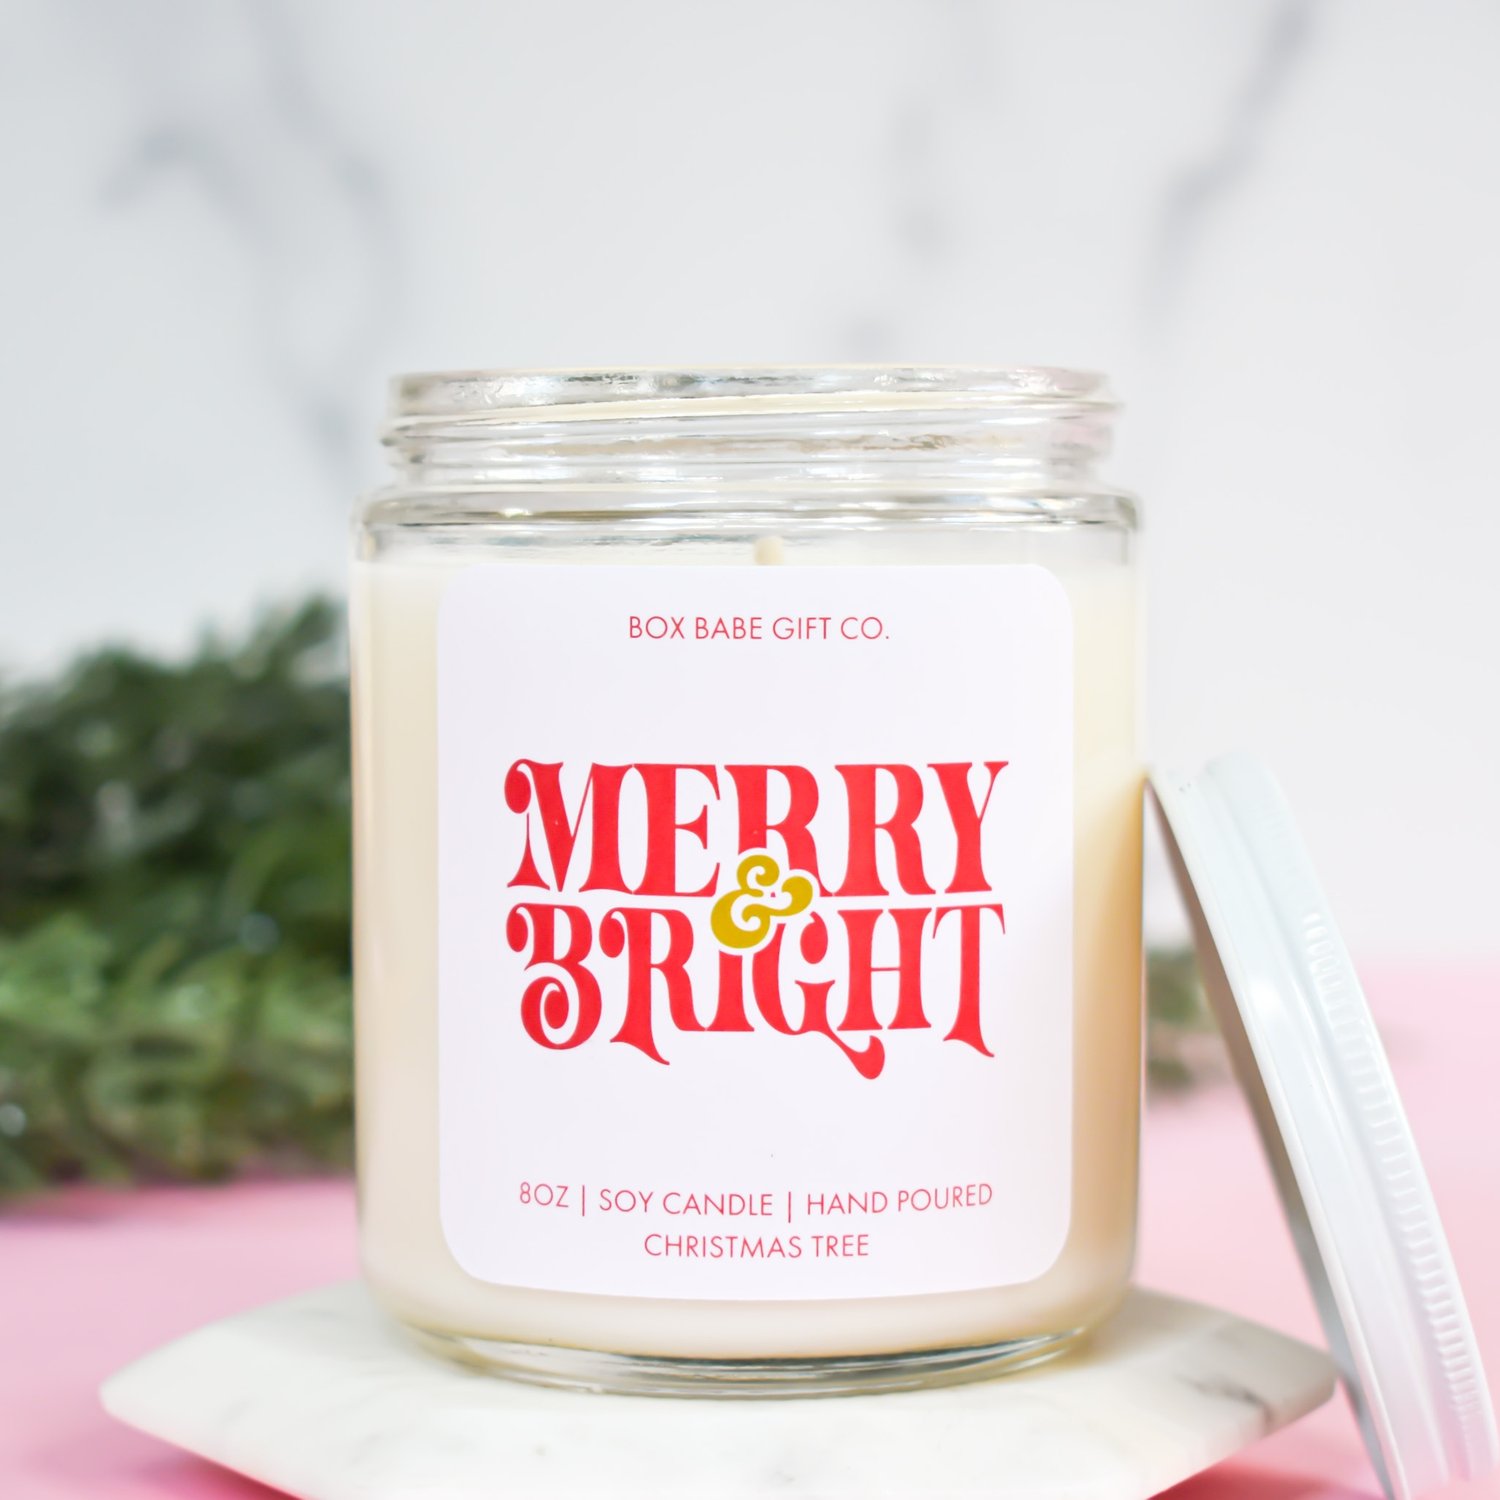 merry and bright candle - Jane Dottie Vintage
2021 Holiday Guide - 15 Gift Ideas for Everyone